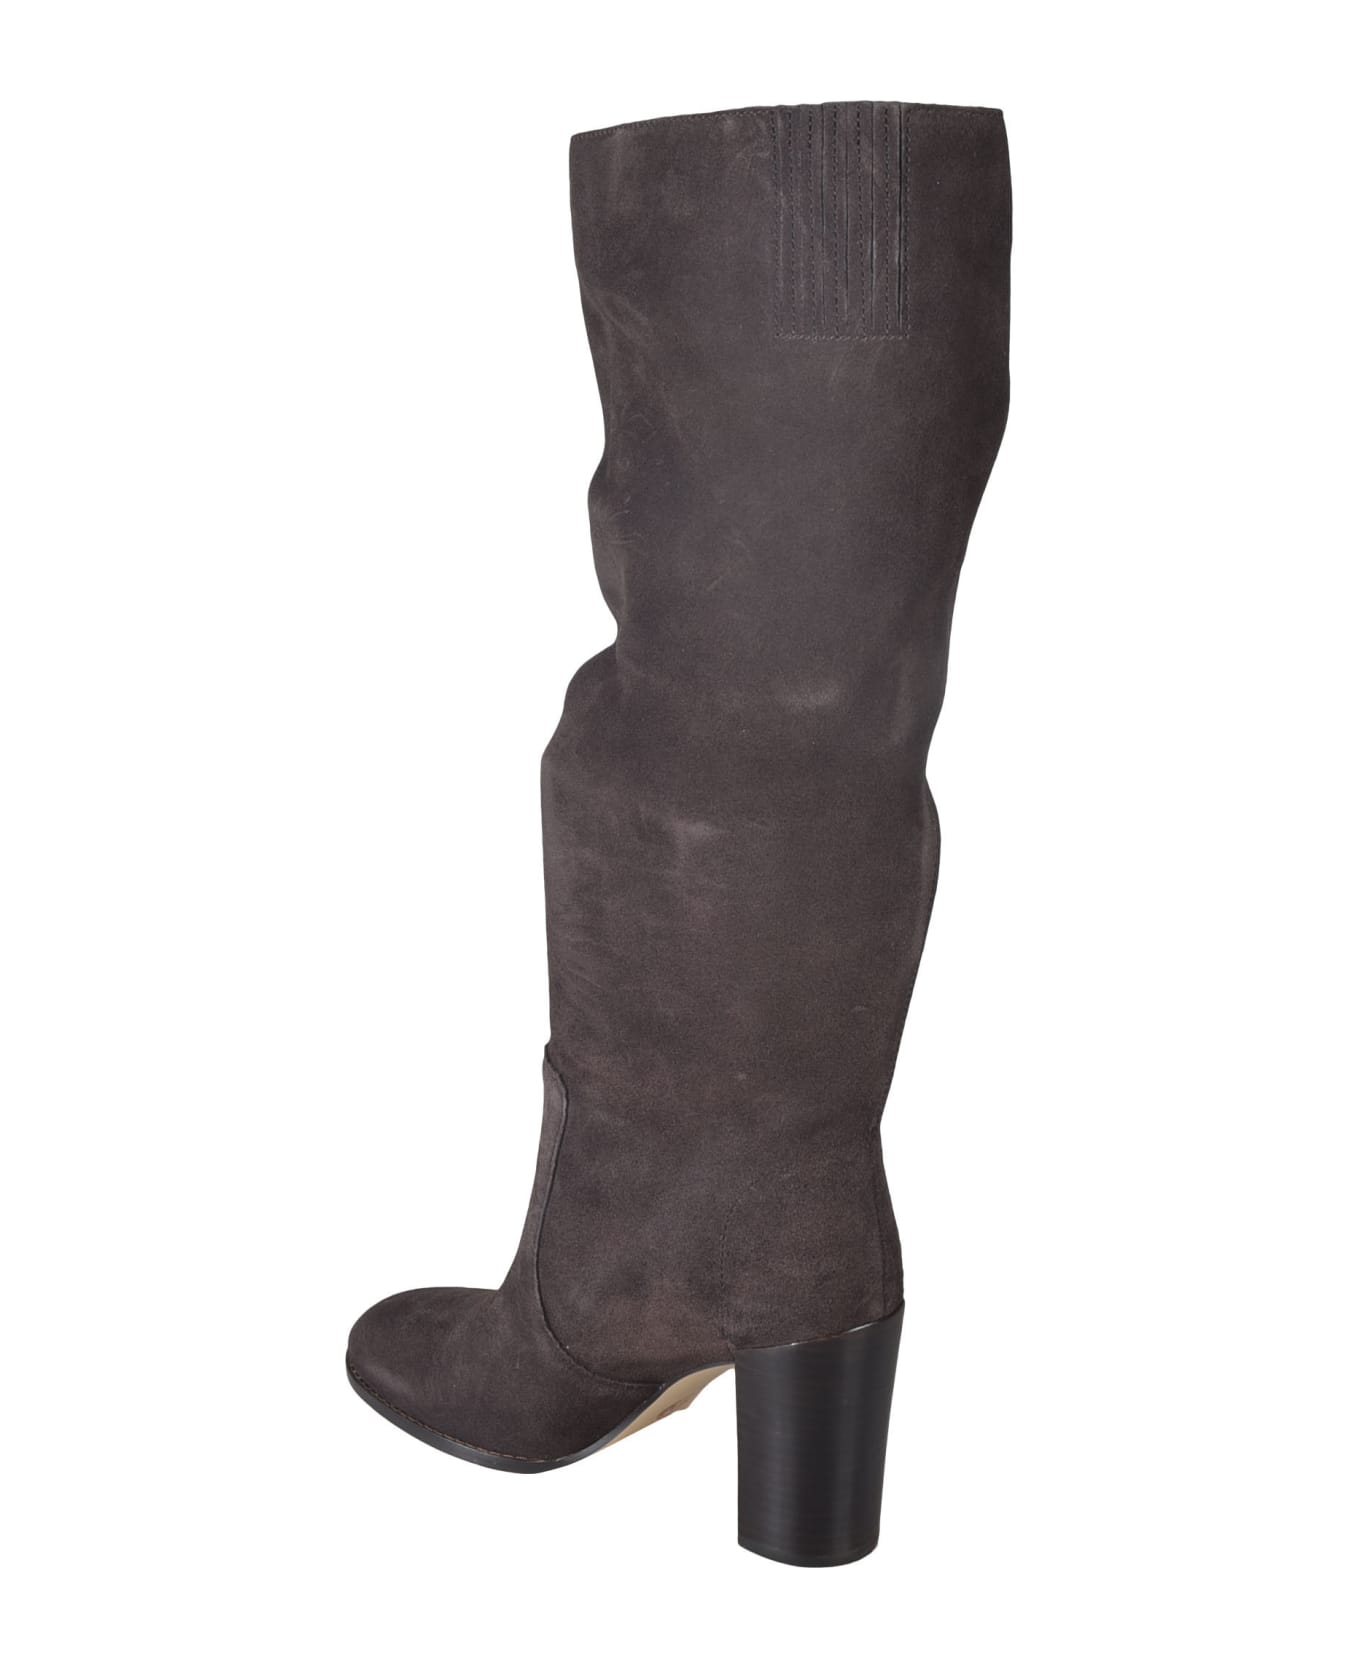 Michael Kors Luella Suede Knee High Boots - Chocolate ブーツ